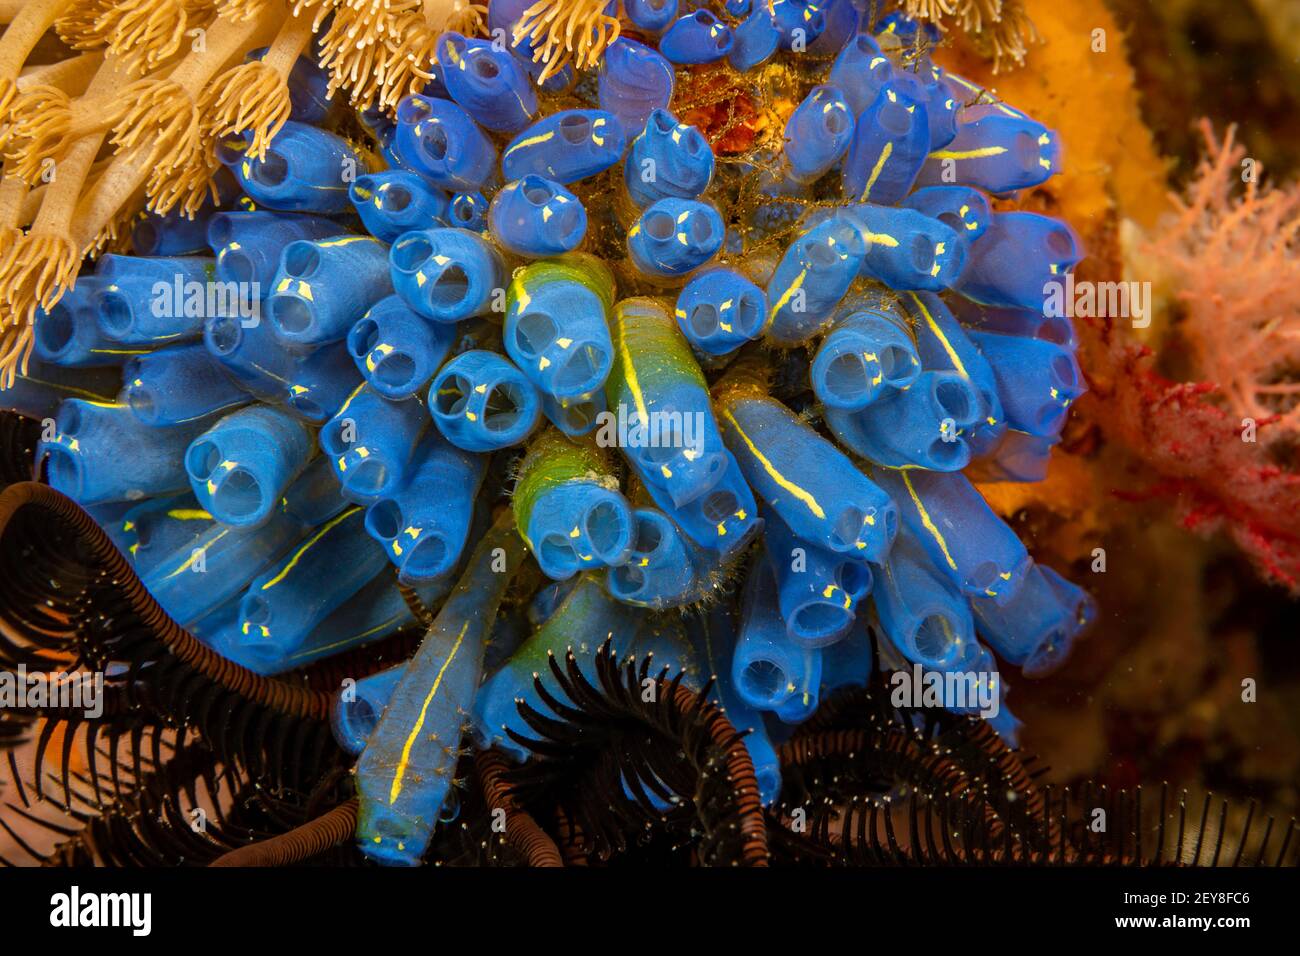 A colony of tunicates, Clavelina robusta, also known as sea squirts, or ascidian, Philippines. Stock Photo